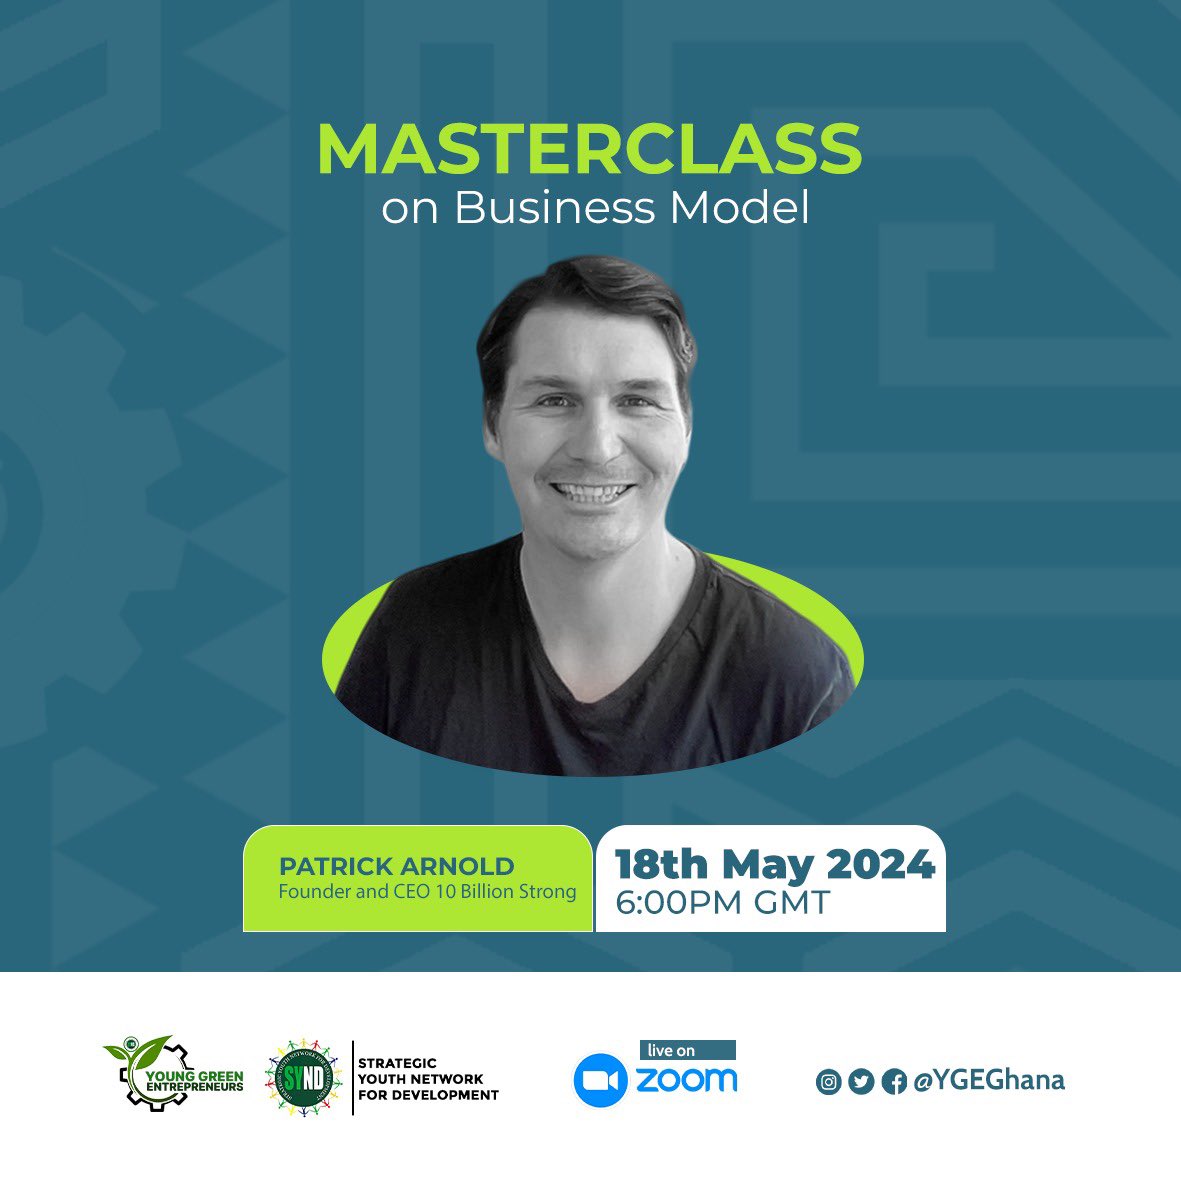 Calling all entrepreneurs and aspiring business leaders!

Join our FREE masterclass on crafting winning business models this Saturday, May 18th at 6:00 PM GMT.

Sharpen your skills and learn gain insights to turn your ideas into reality #SYNDGhana #GreenBusiness #ClimateAction